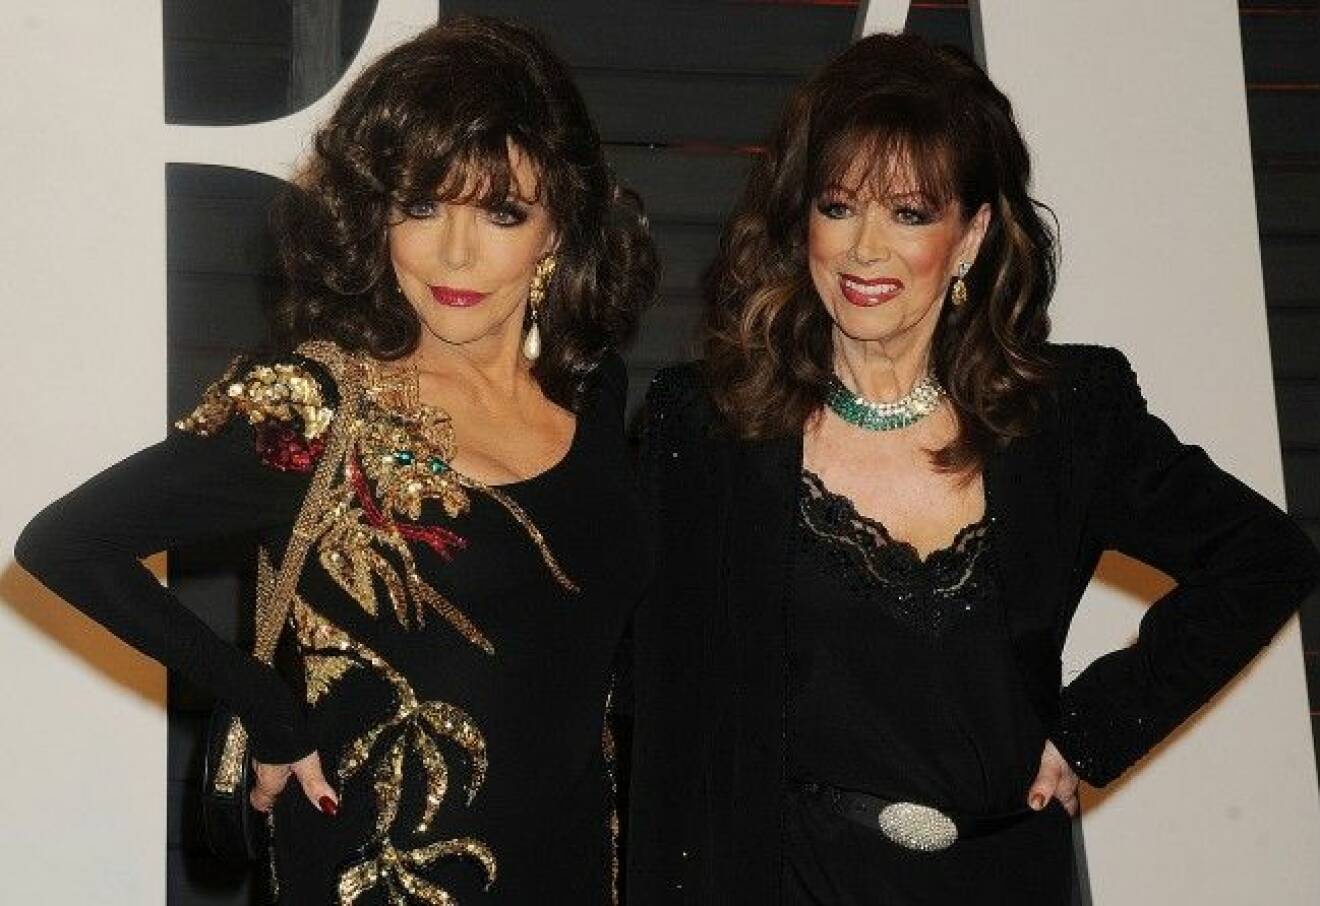 NO JUST JARED USAGE Jackie Collins Has Died of Breast Cancer at 77 - FIle Photos Pictured: Joan Collins, Jackie Collins Ref: SPL1131737 190915 Picture by: Splash News Splash News and Pictures Los Angeles:310-821-2666 New York: 212-619-2666 London: 870-934-2666 photodesk@splashnews.com 